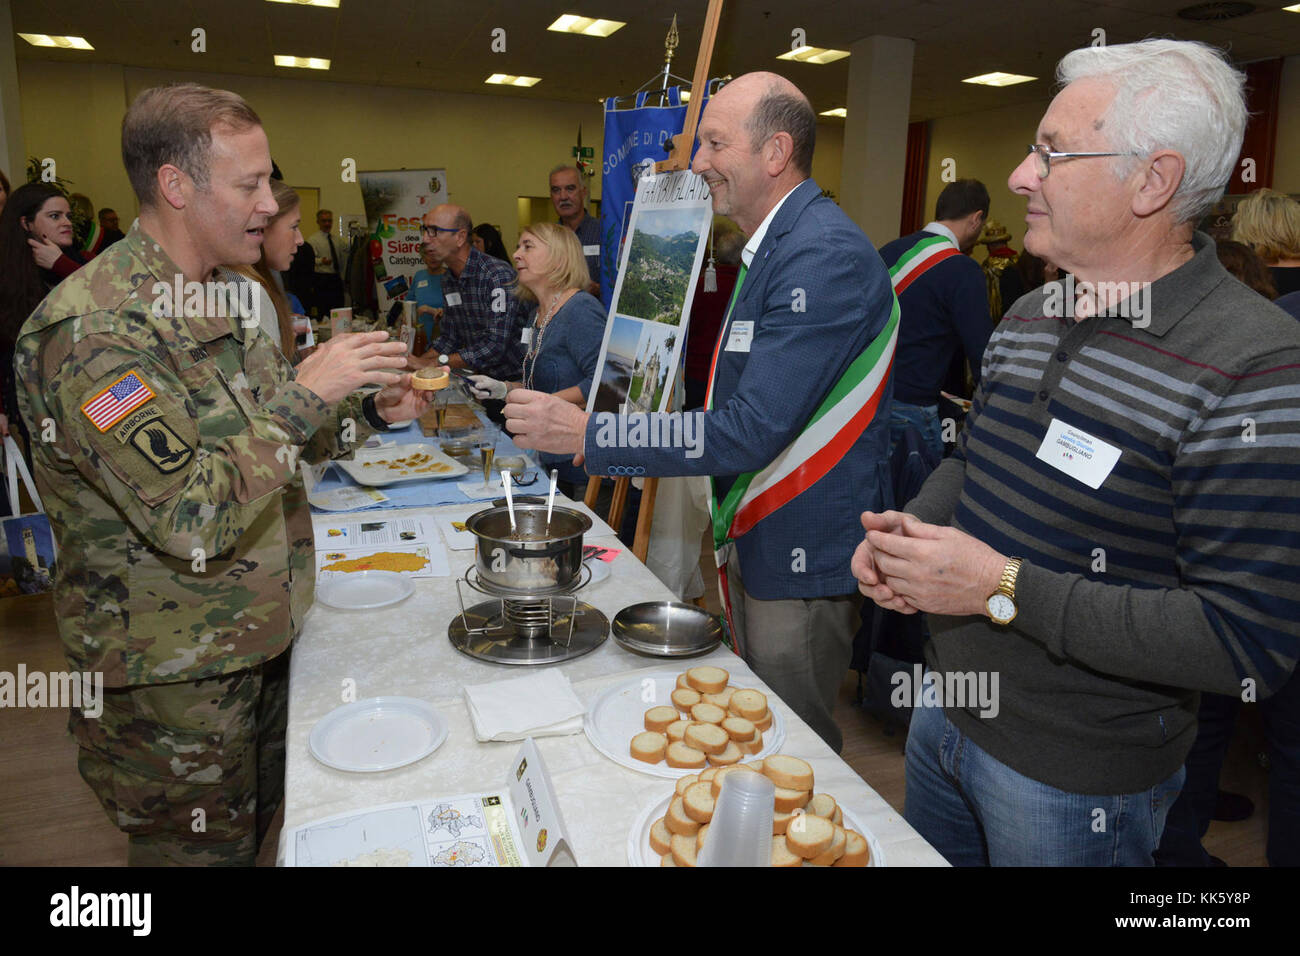 U.S. Col. Eric M. Berdy, U.S. Army Garrison Italy commander, speaks with Diego Maria Santagiuliana, councilman of Gambugliano, during the Meet the Mayors event at the Golden Lion Conference Center on Caserma Ederle, Vicenza, Italy, Nov. 8, 2017.   The event is an informal fair that hosts mayors, council members, and cultural and tourism representatives from Italian townships in the Vicenza and Padova provinces. (U.S. Army Photo by Paolo Bovo) Stock Photo